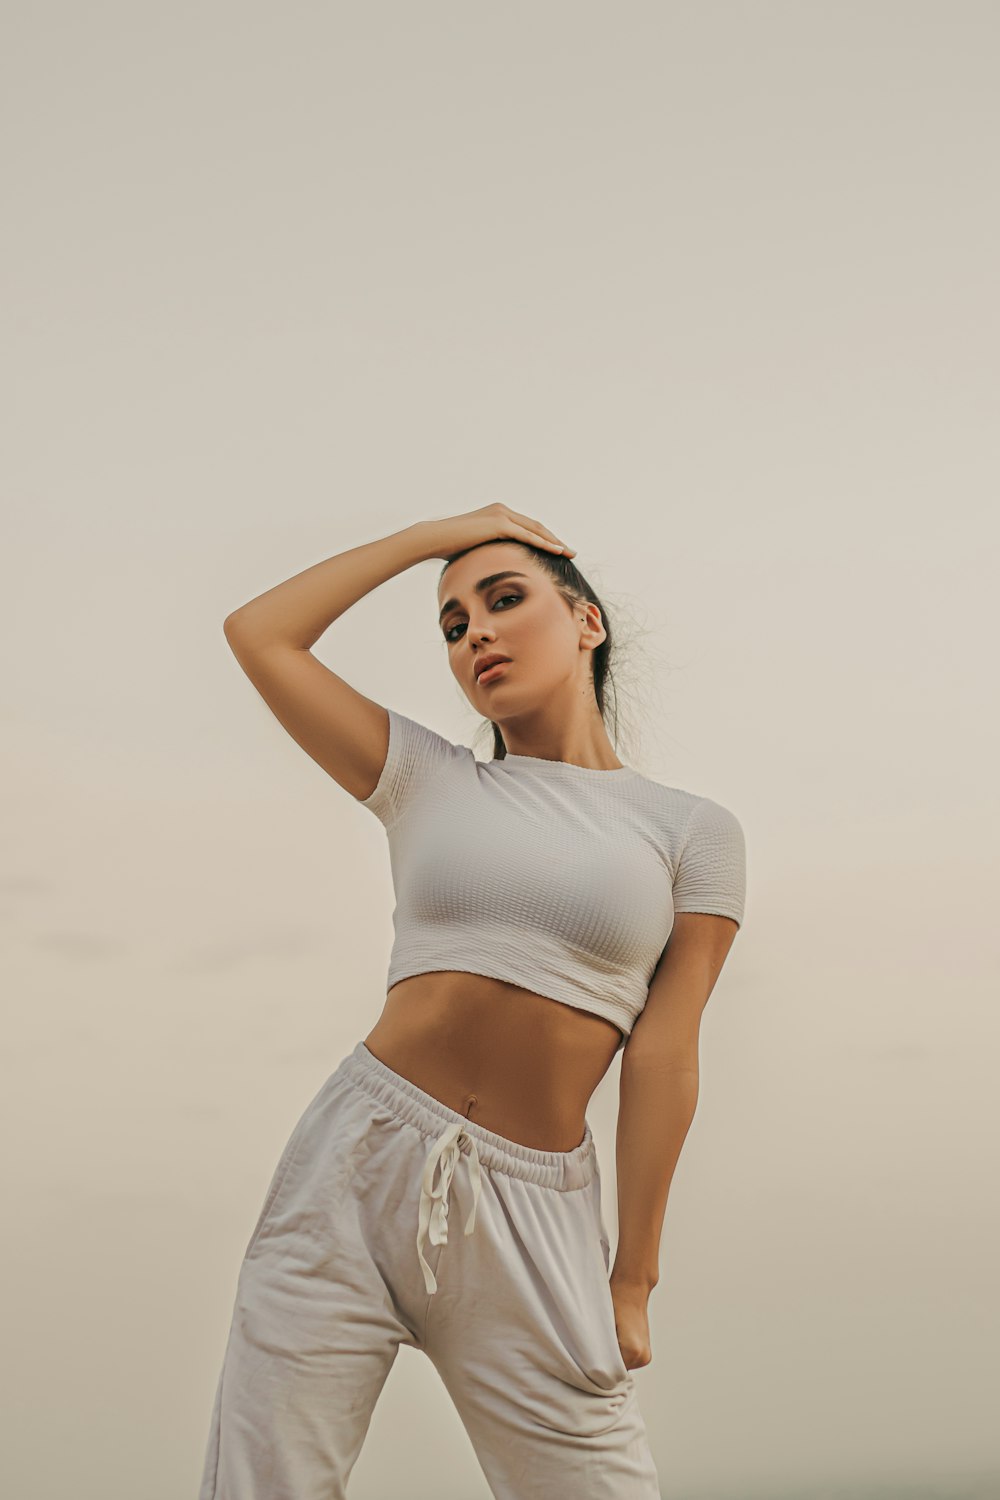 woman in white crop top and white skirt